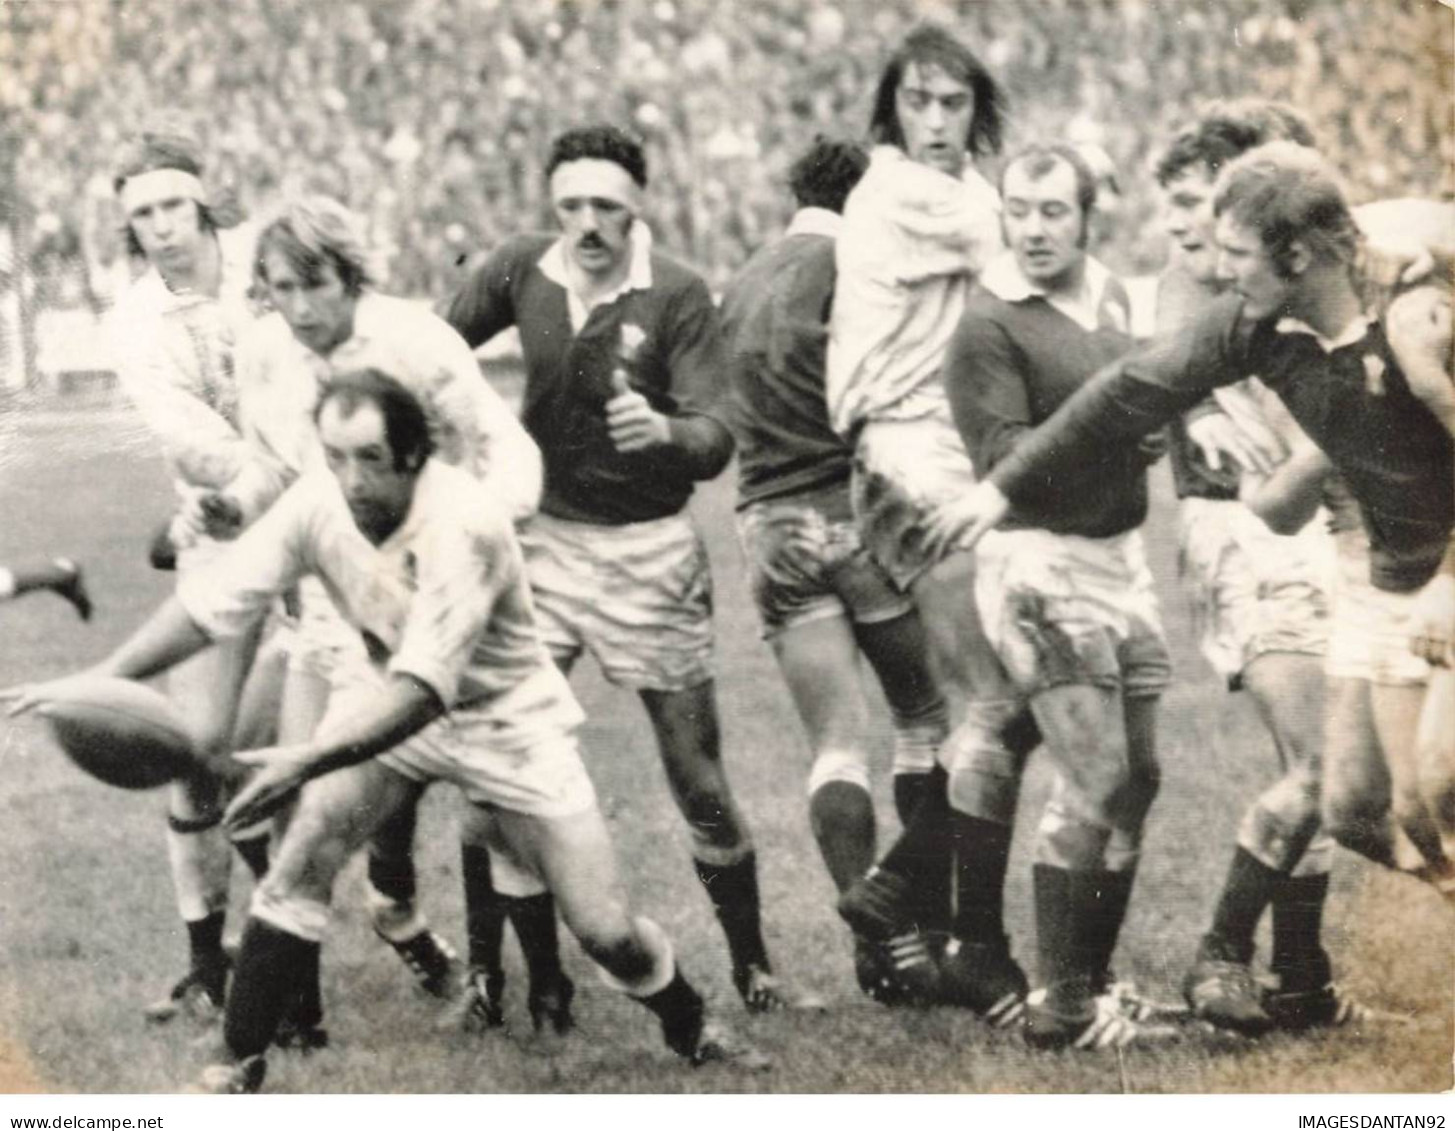 RUGBY #PPMK1379 PHOTO MATCH DE RUGBY ANGLETERRE GALLES A CARDIFF 20 /1 /73 - Sport